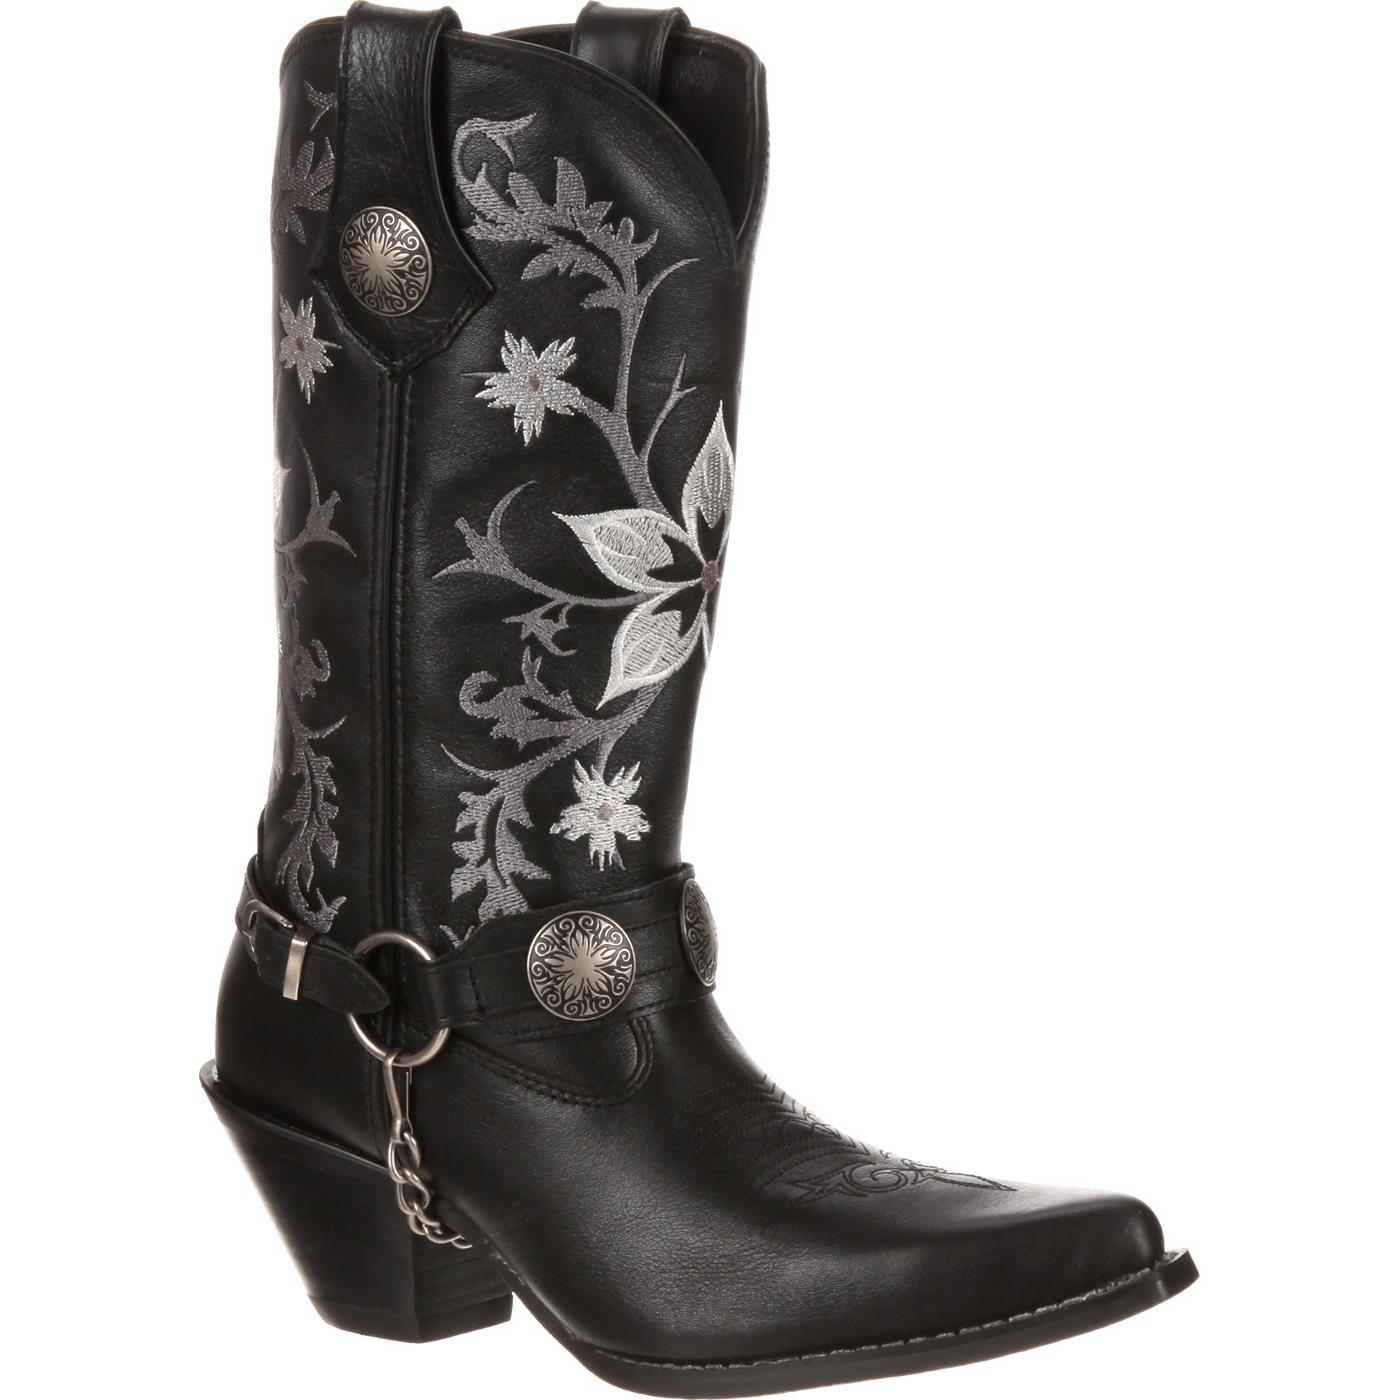 Crush by Durango Black Embroidered Harness Western Boots (Style #DCRD035)